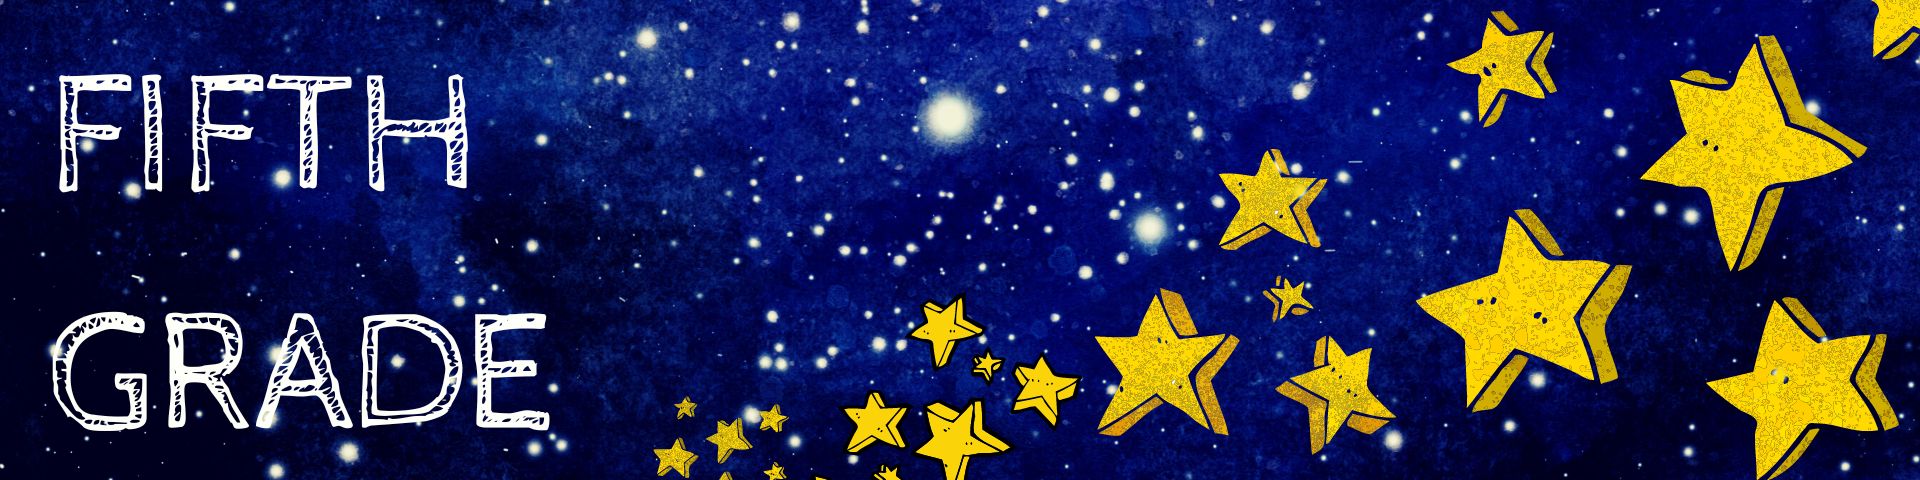 5th grade with stars and night sky background